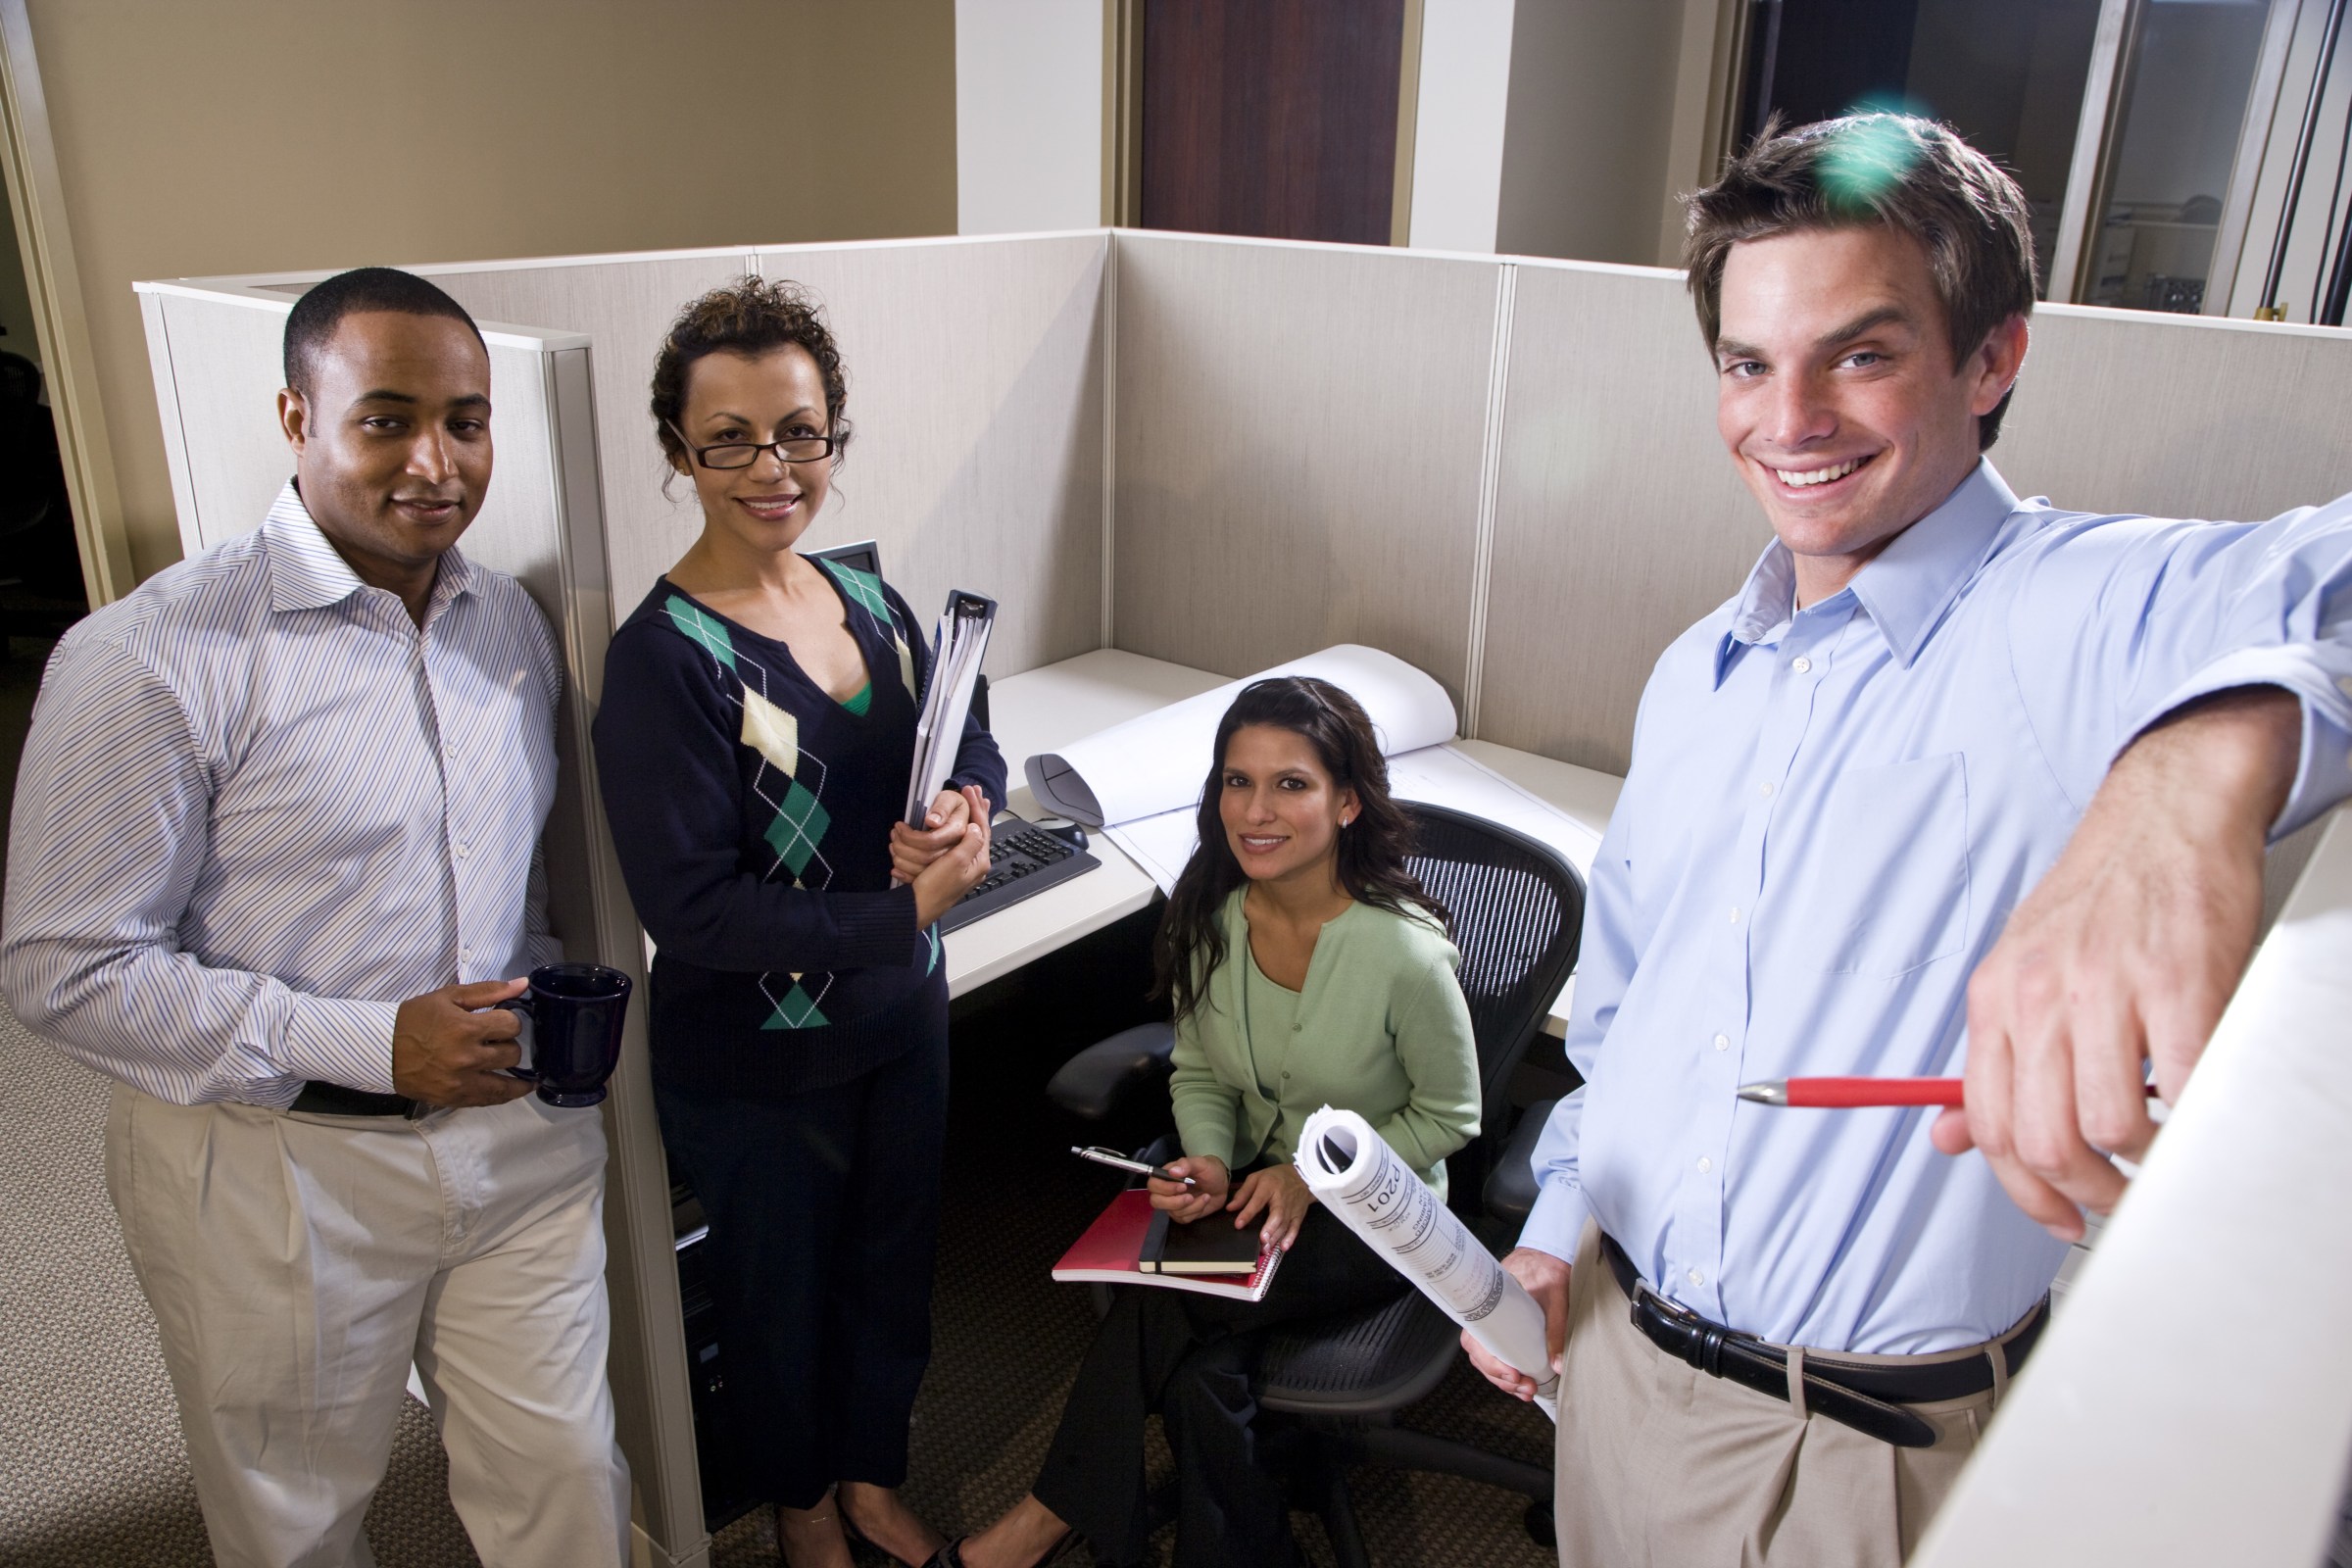 three people standing in an office cubicle holding scissors